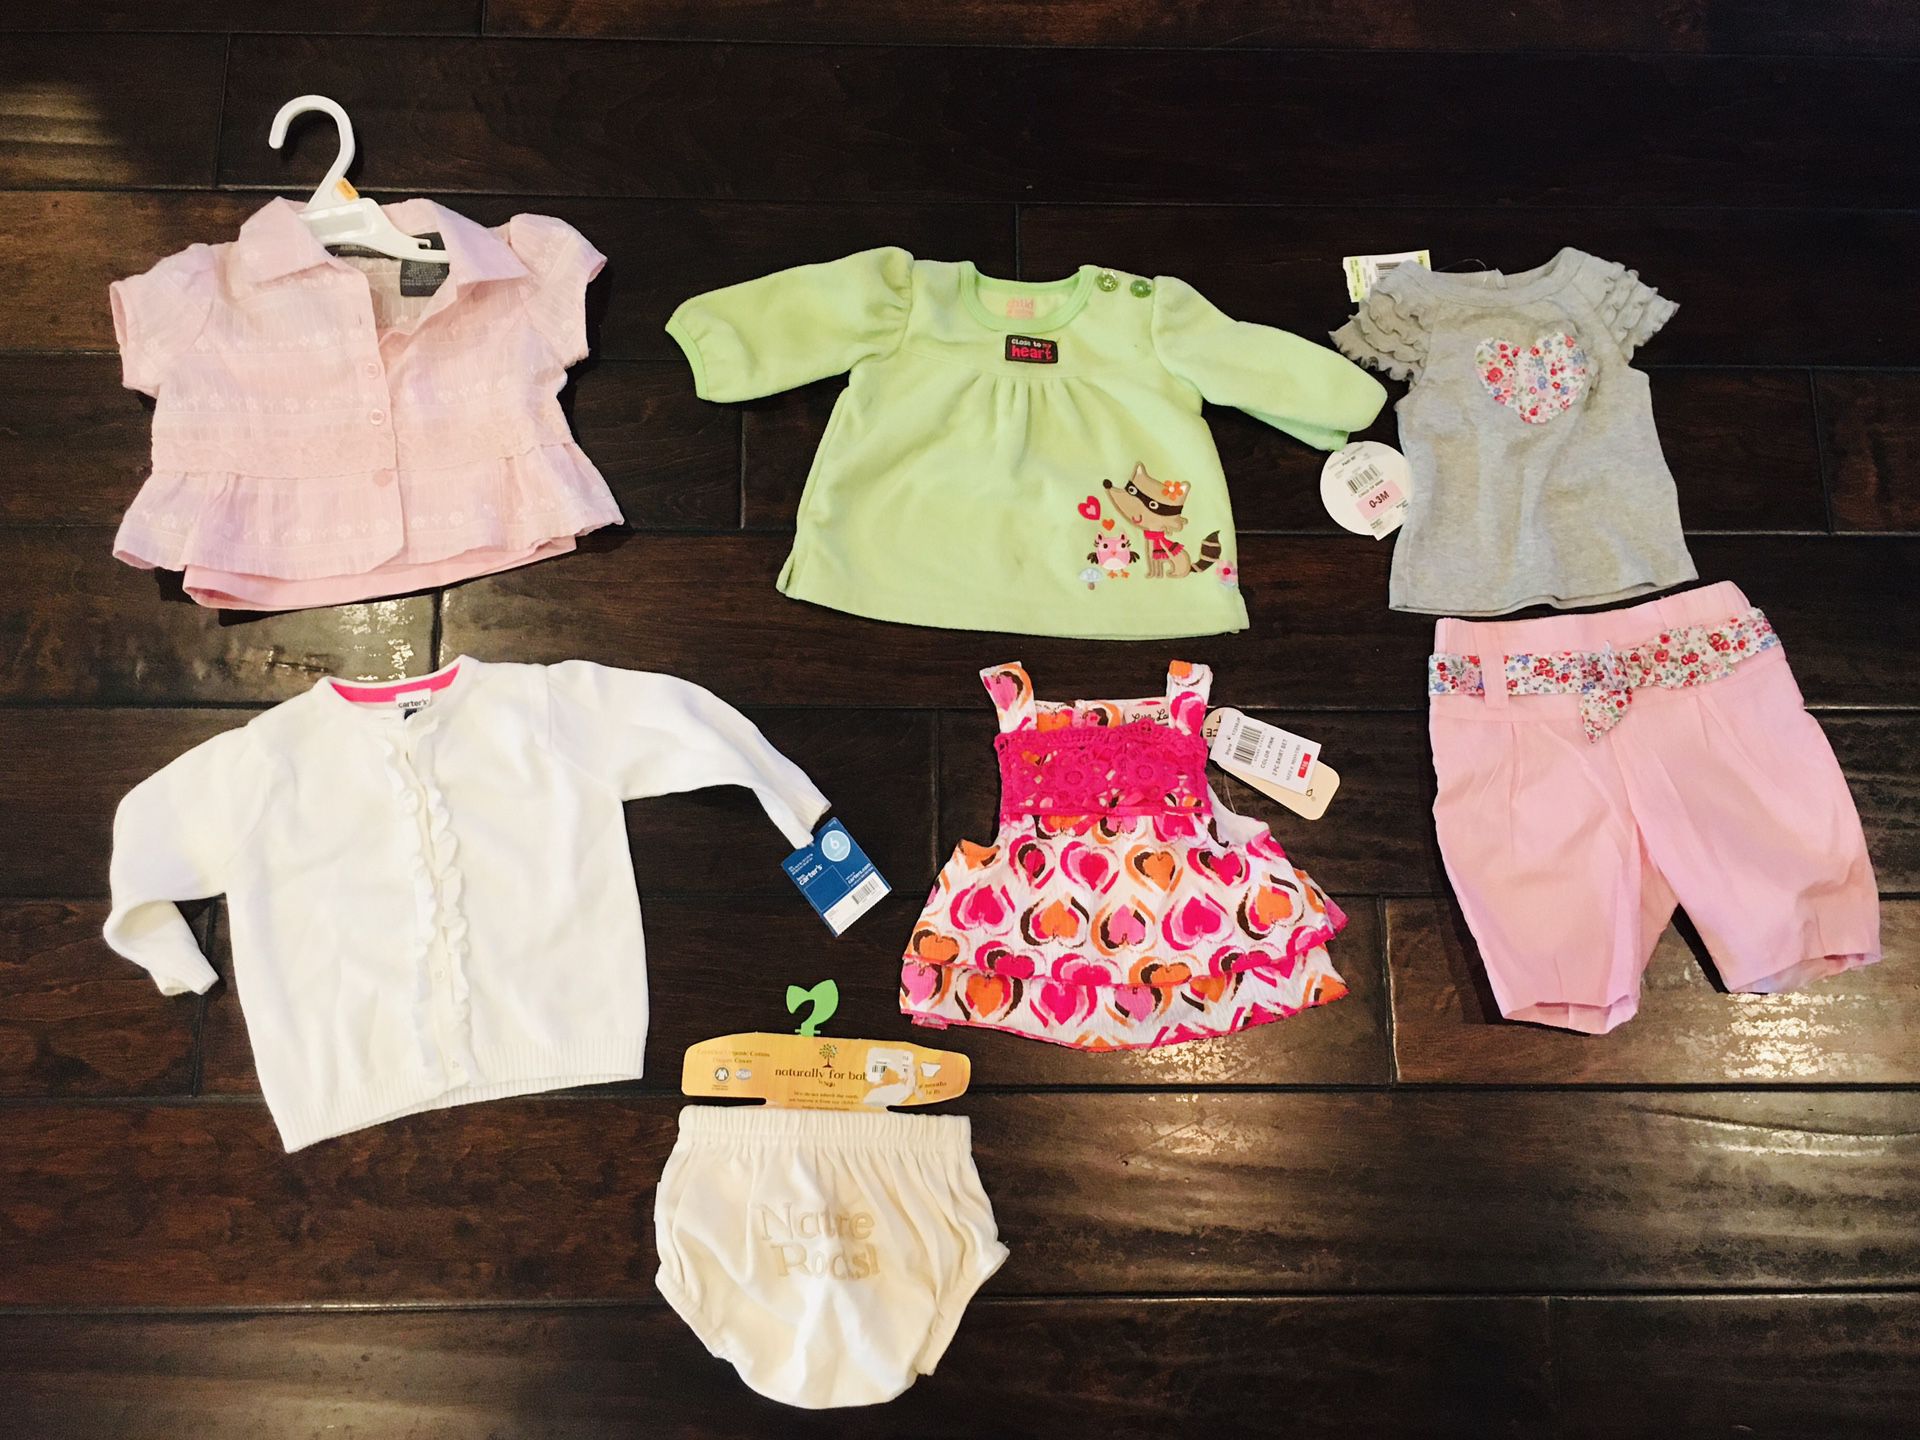 Baby girl clothes all new with tags size 0-12 months